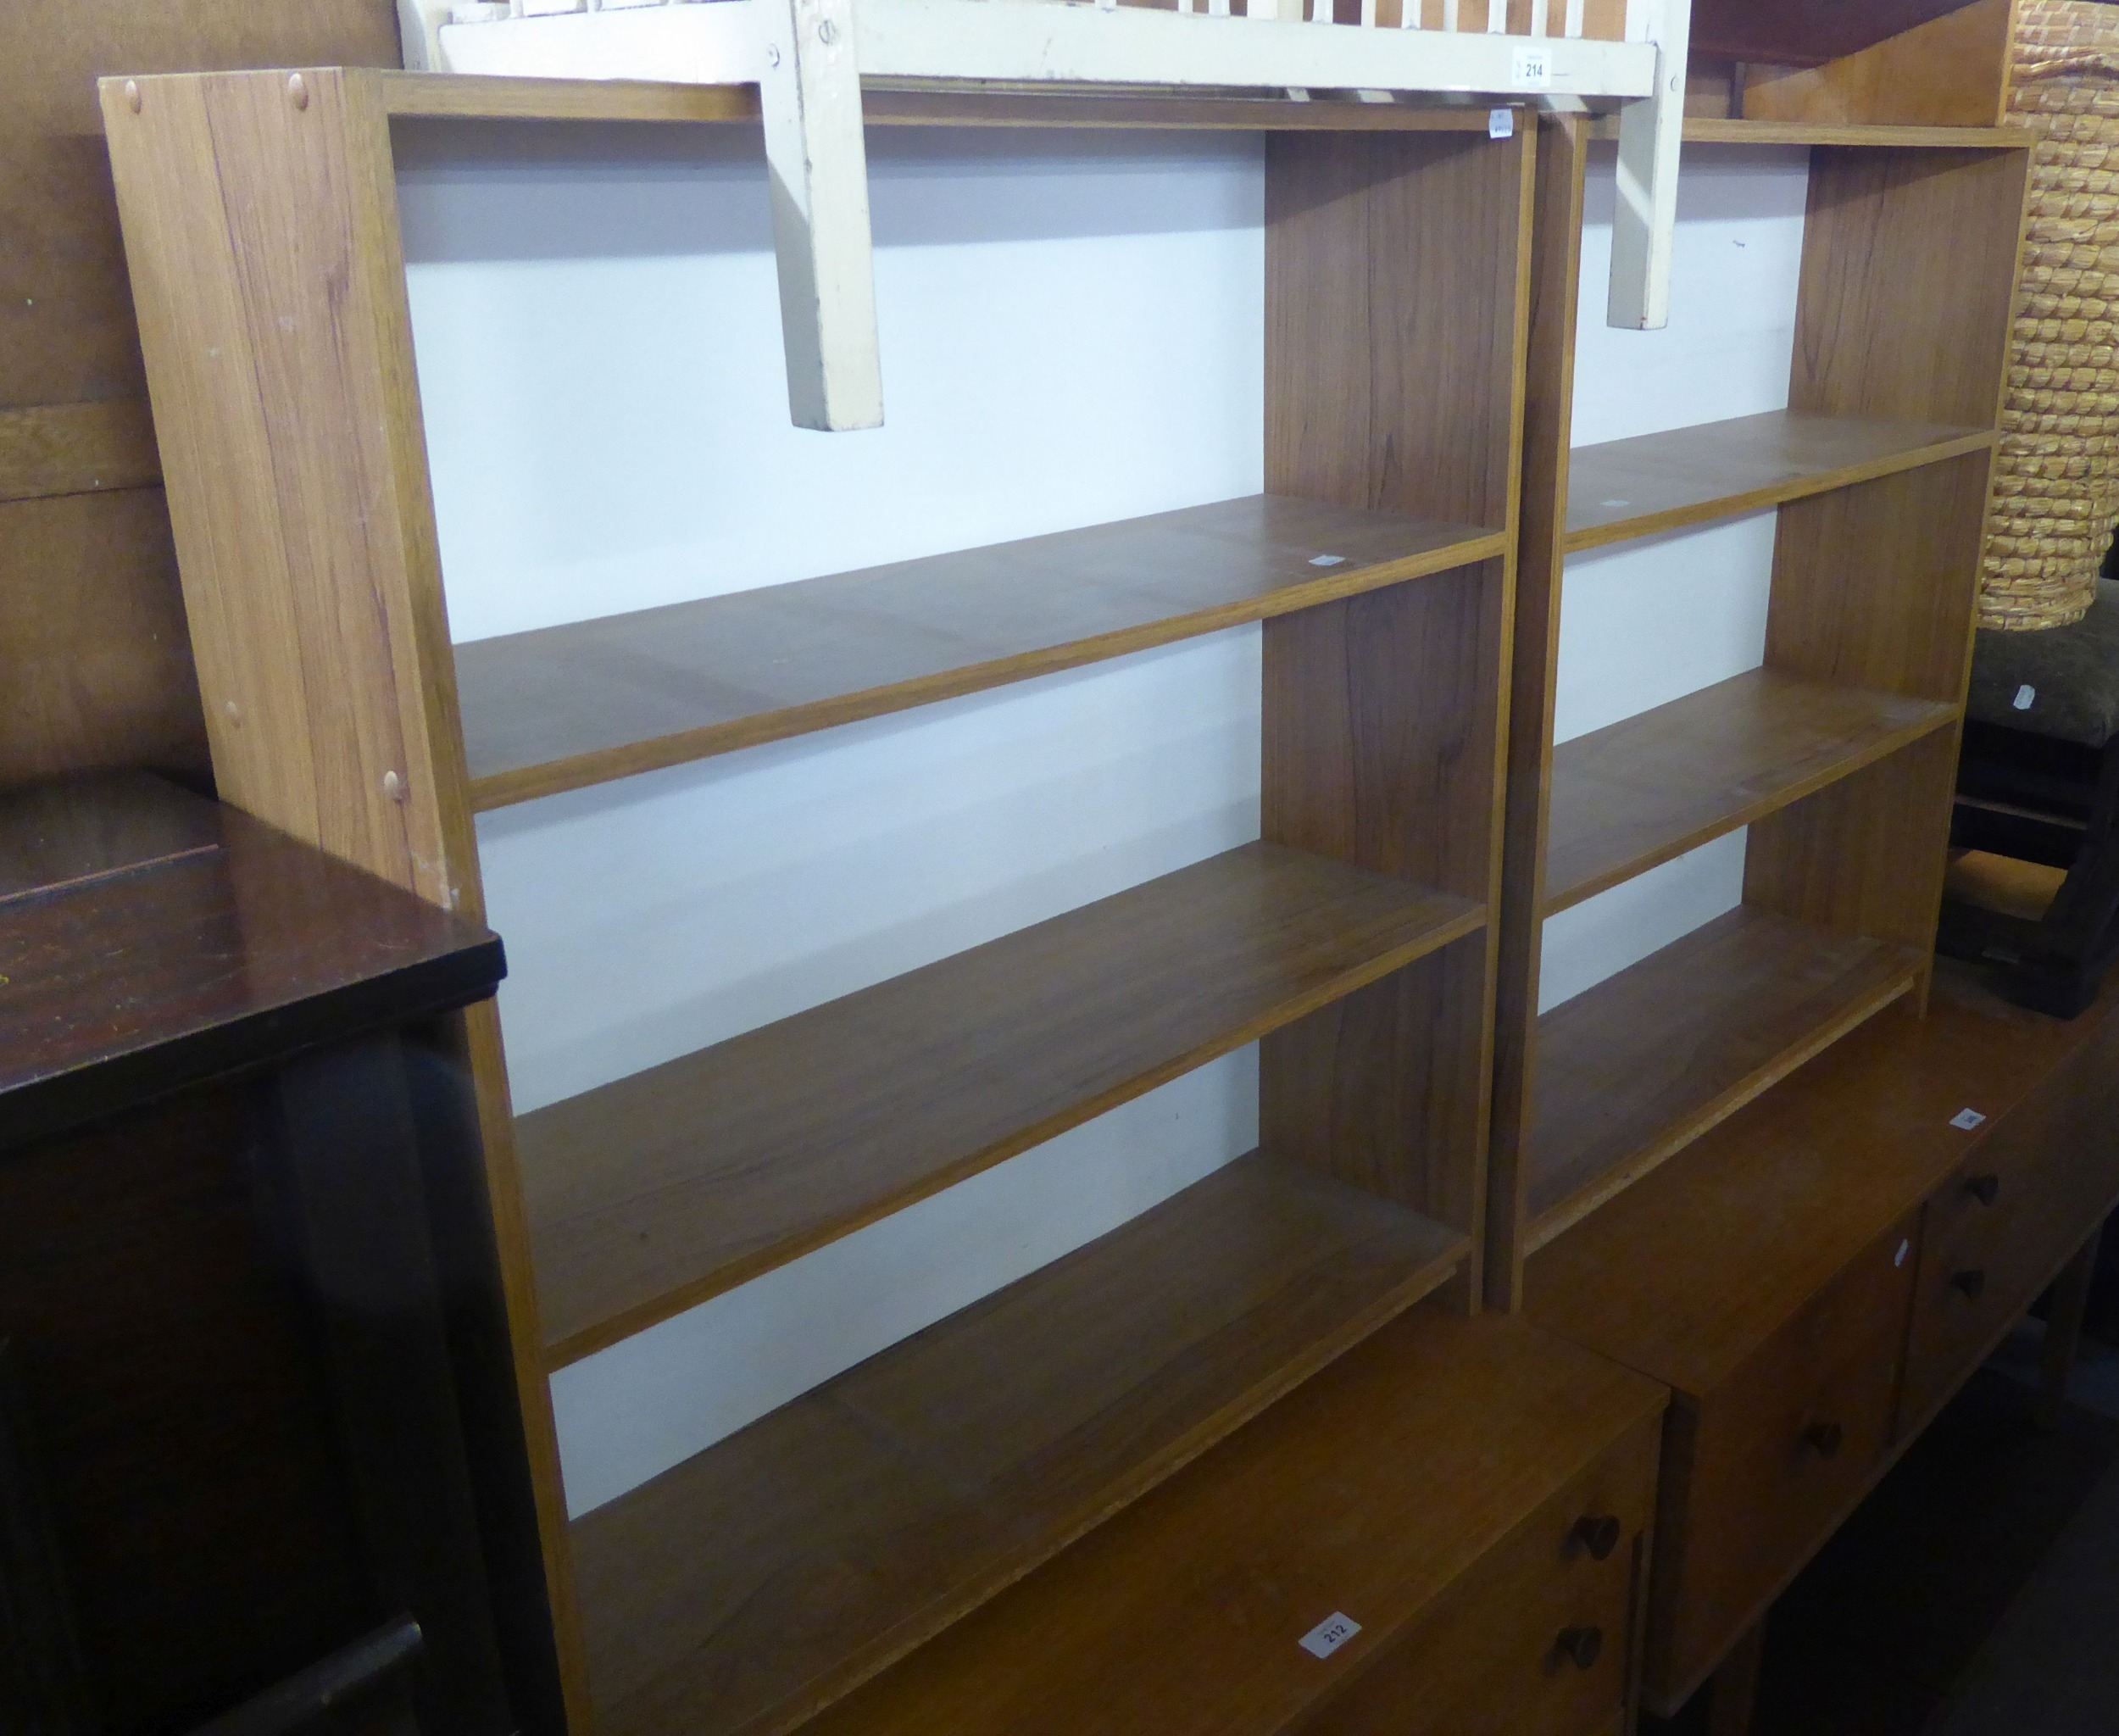 A PAIR OF BOOKCASES WITH GLASS SLIDING DOORS AND TWO SMALL OPEN BOOKCASES - Image 2 of 2